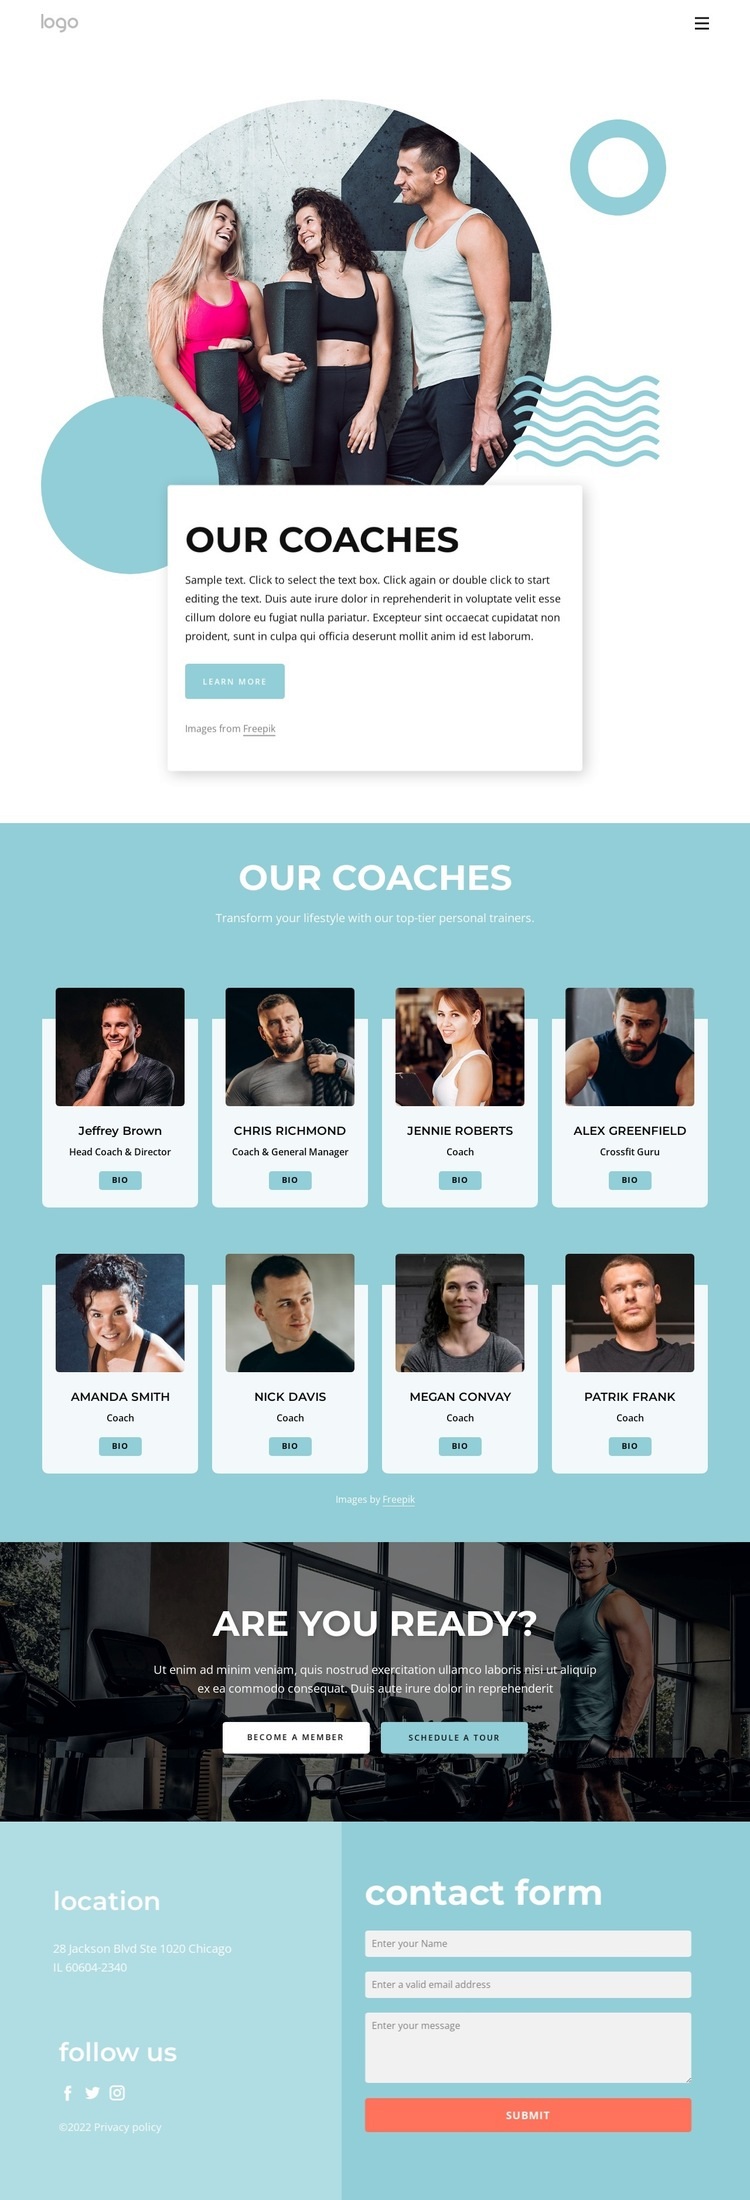 Our Coaches Homepage Design